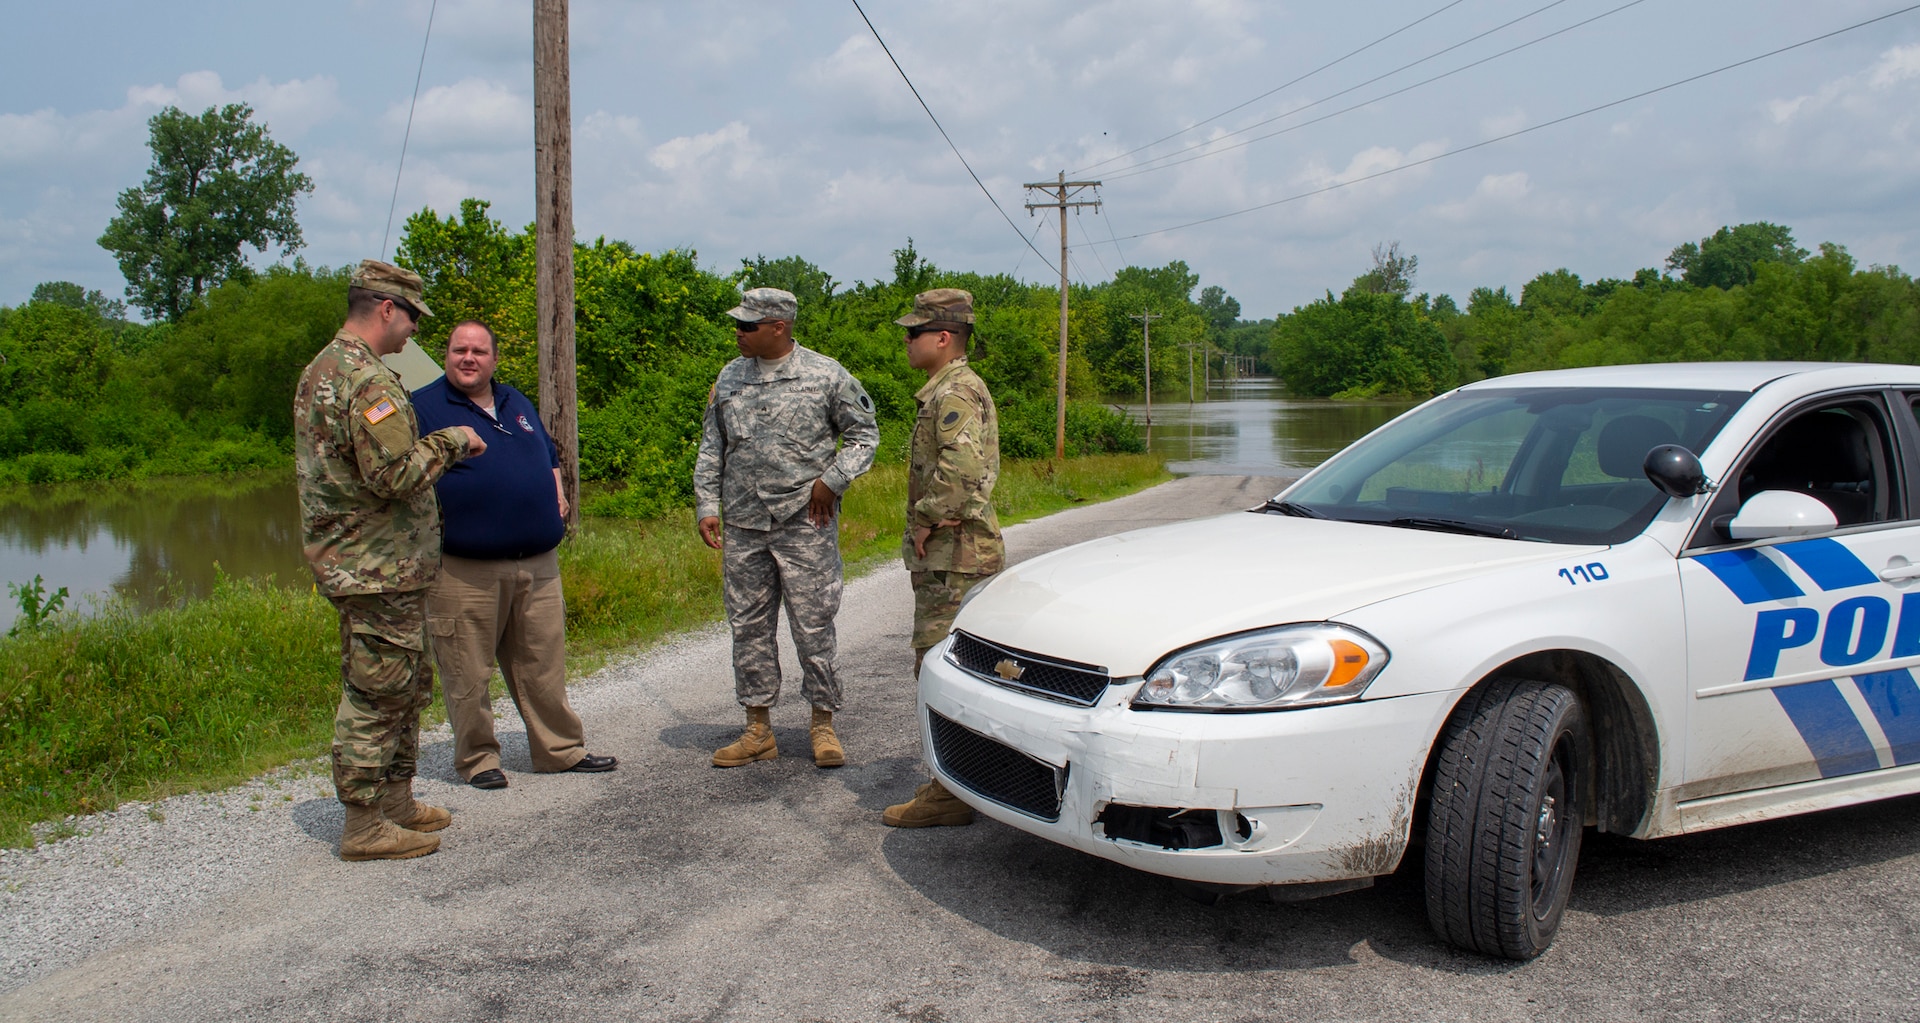 Sgt. Joey White, of Chicago, Pfc. Andrew Gusich, of Mendota, and Spec. Eder Castillo, of Rochelle, discuss levee patrol operations